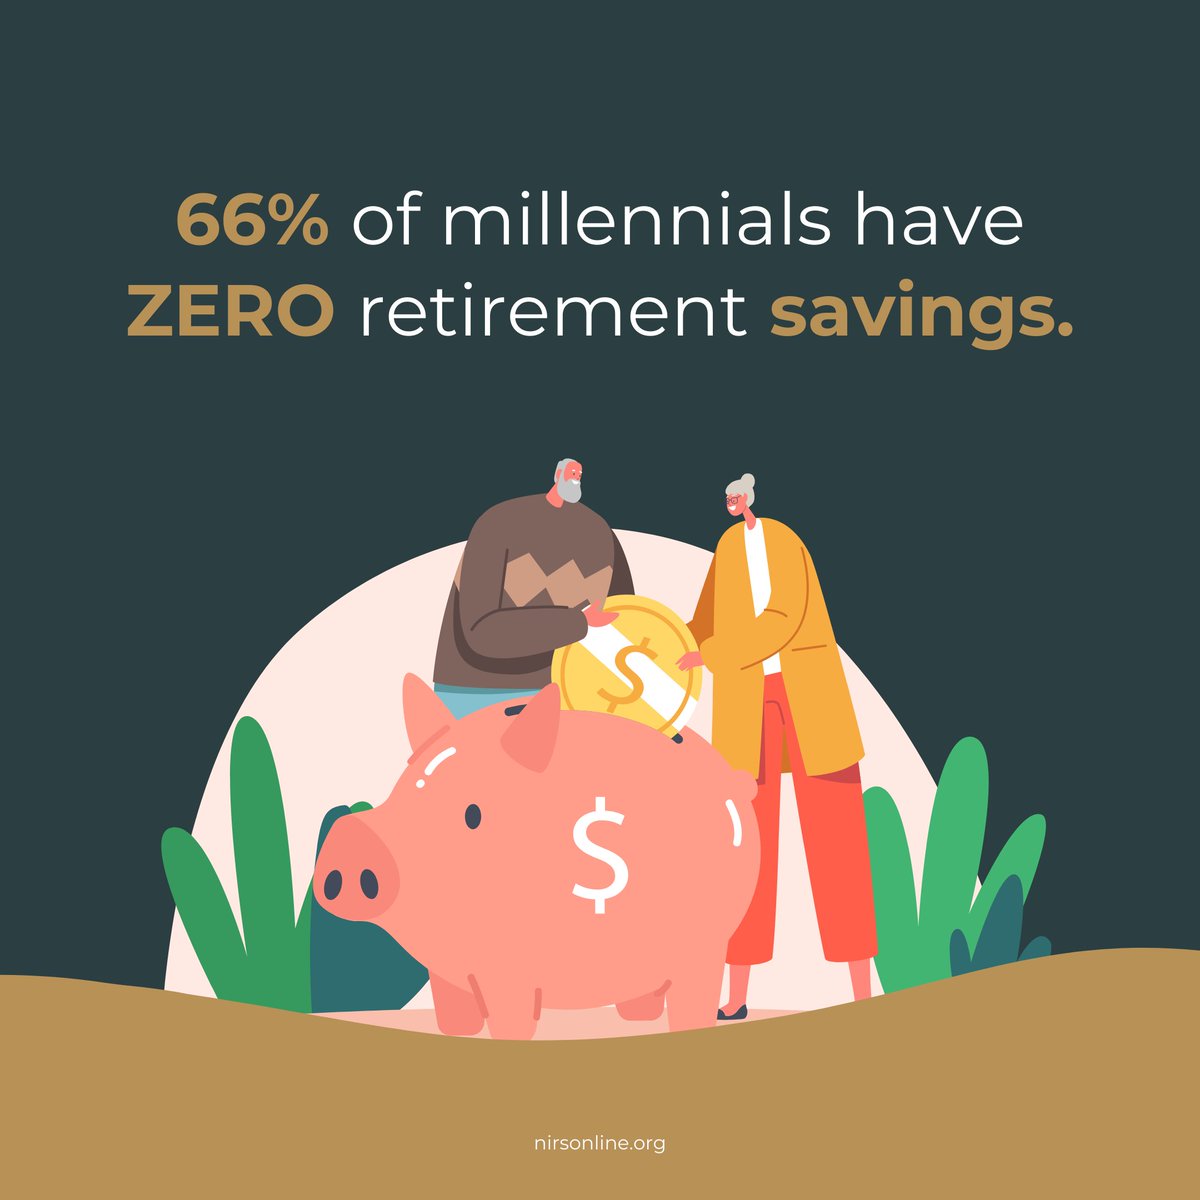 A staggering 66% of millennials currently have ZERO retirement savings. 
It's never too early to start planning for your future! Don't let these statistics define your financial journey.
-
-
-
#BuildingEconomicSecurity #FinancialStat #MillennialFinance #RetirementPlanning